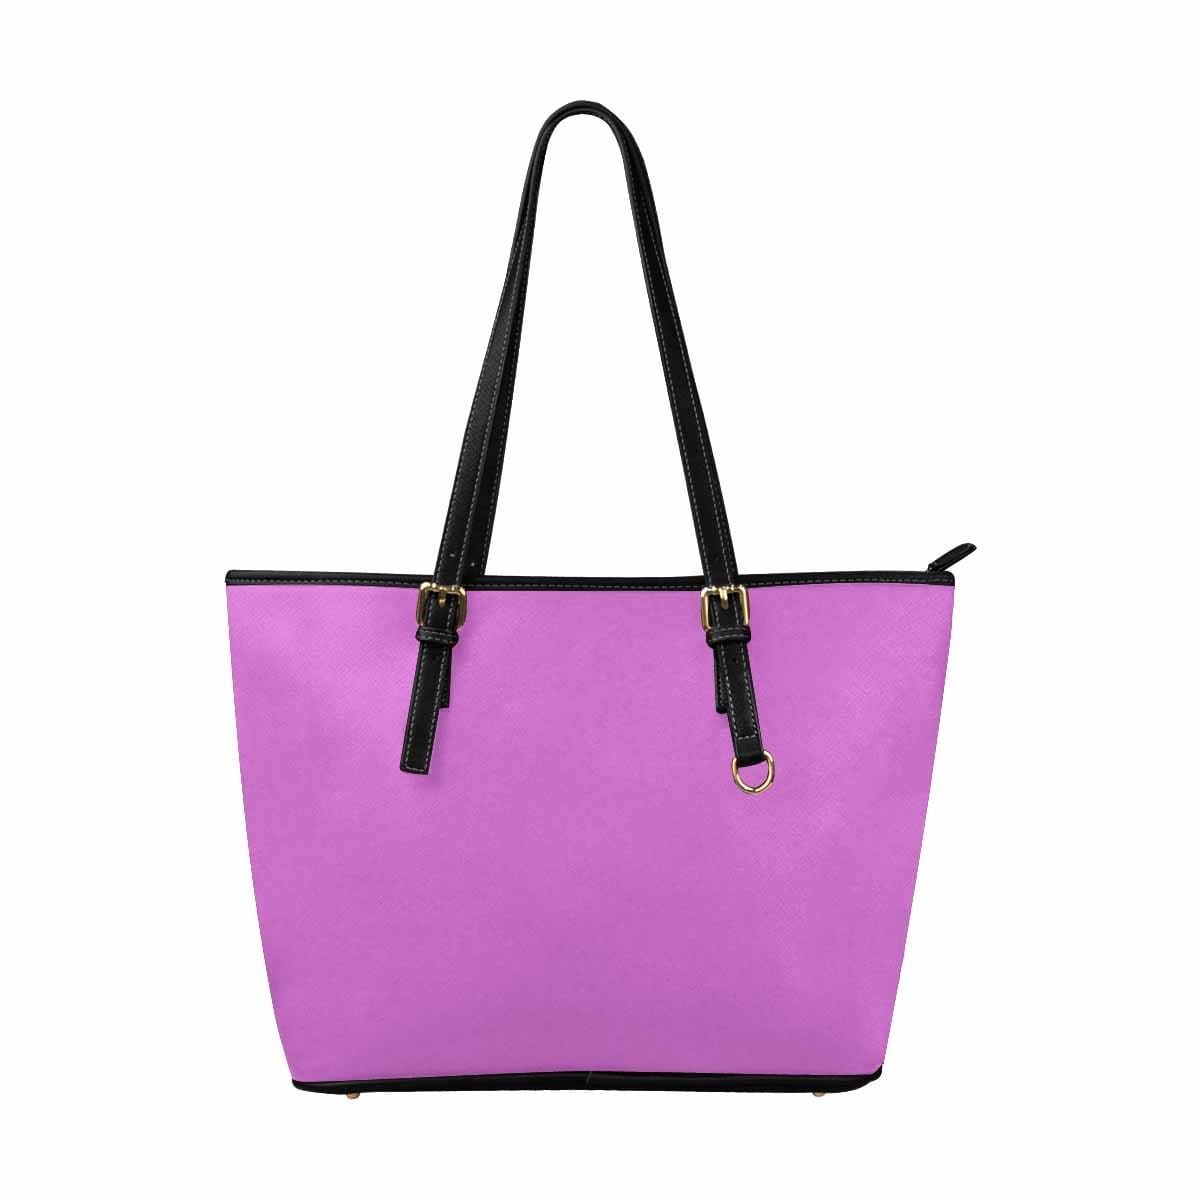 Large Leather Tote Shoulder Bag - Orchid Purple - Bags | Leather Tote Bags